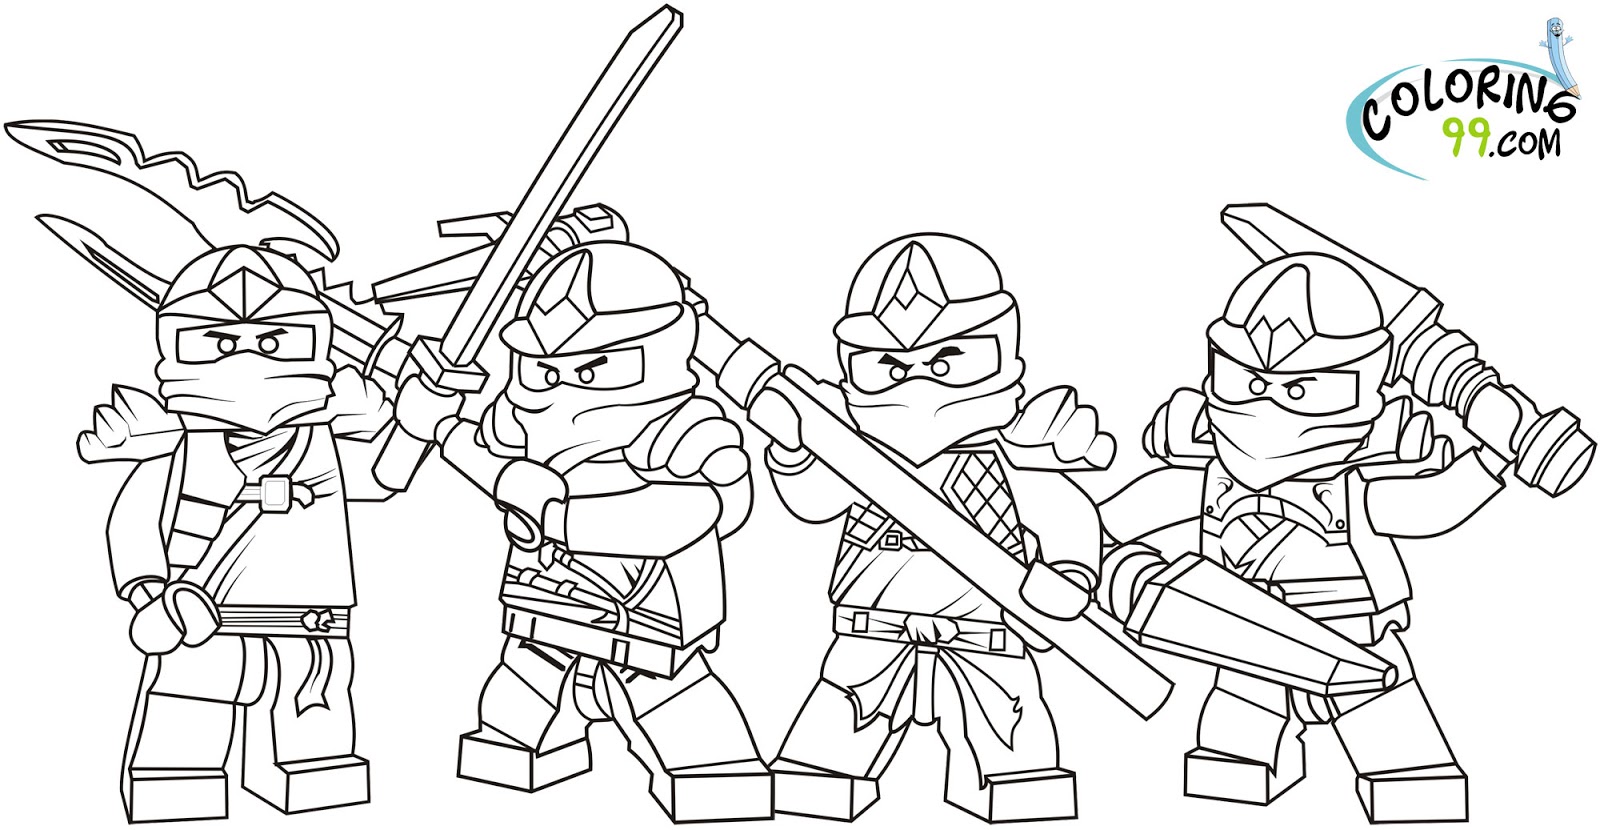 Download Lego Ninjago Coloring Pages | Coloring Pages For Kids